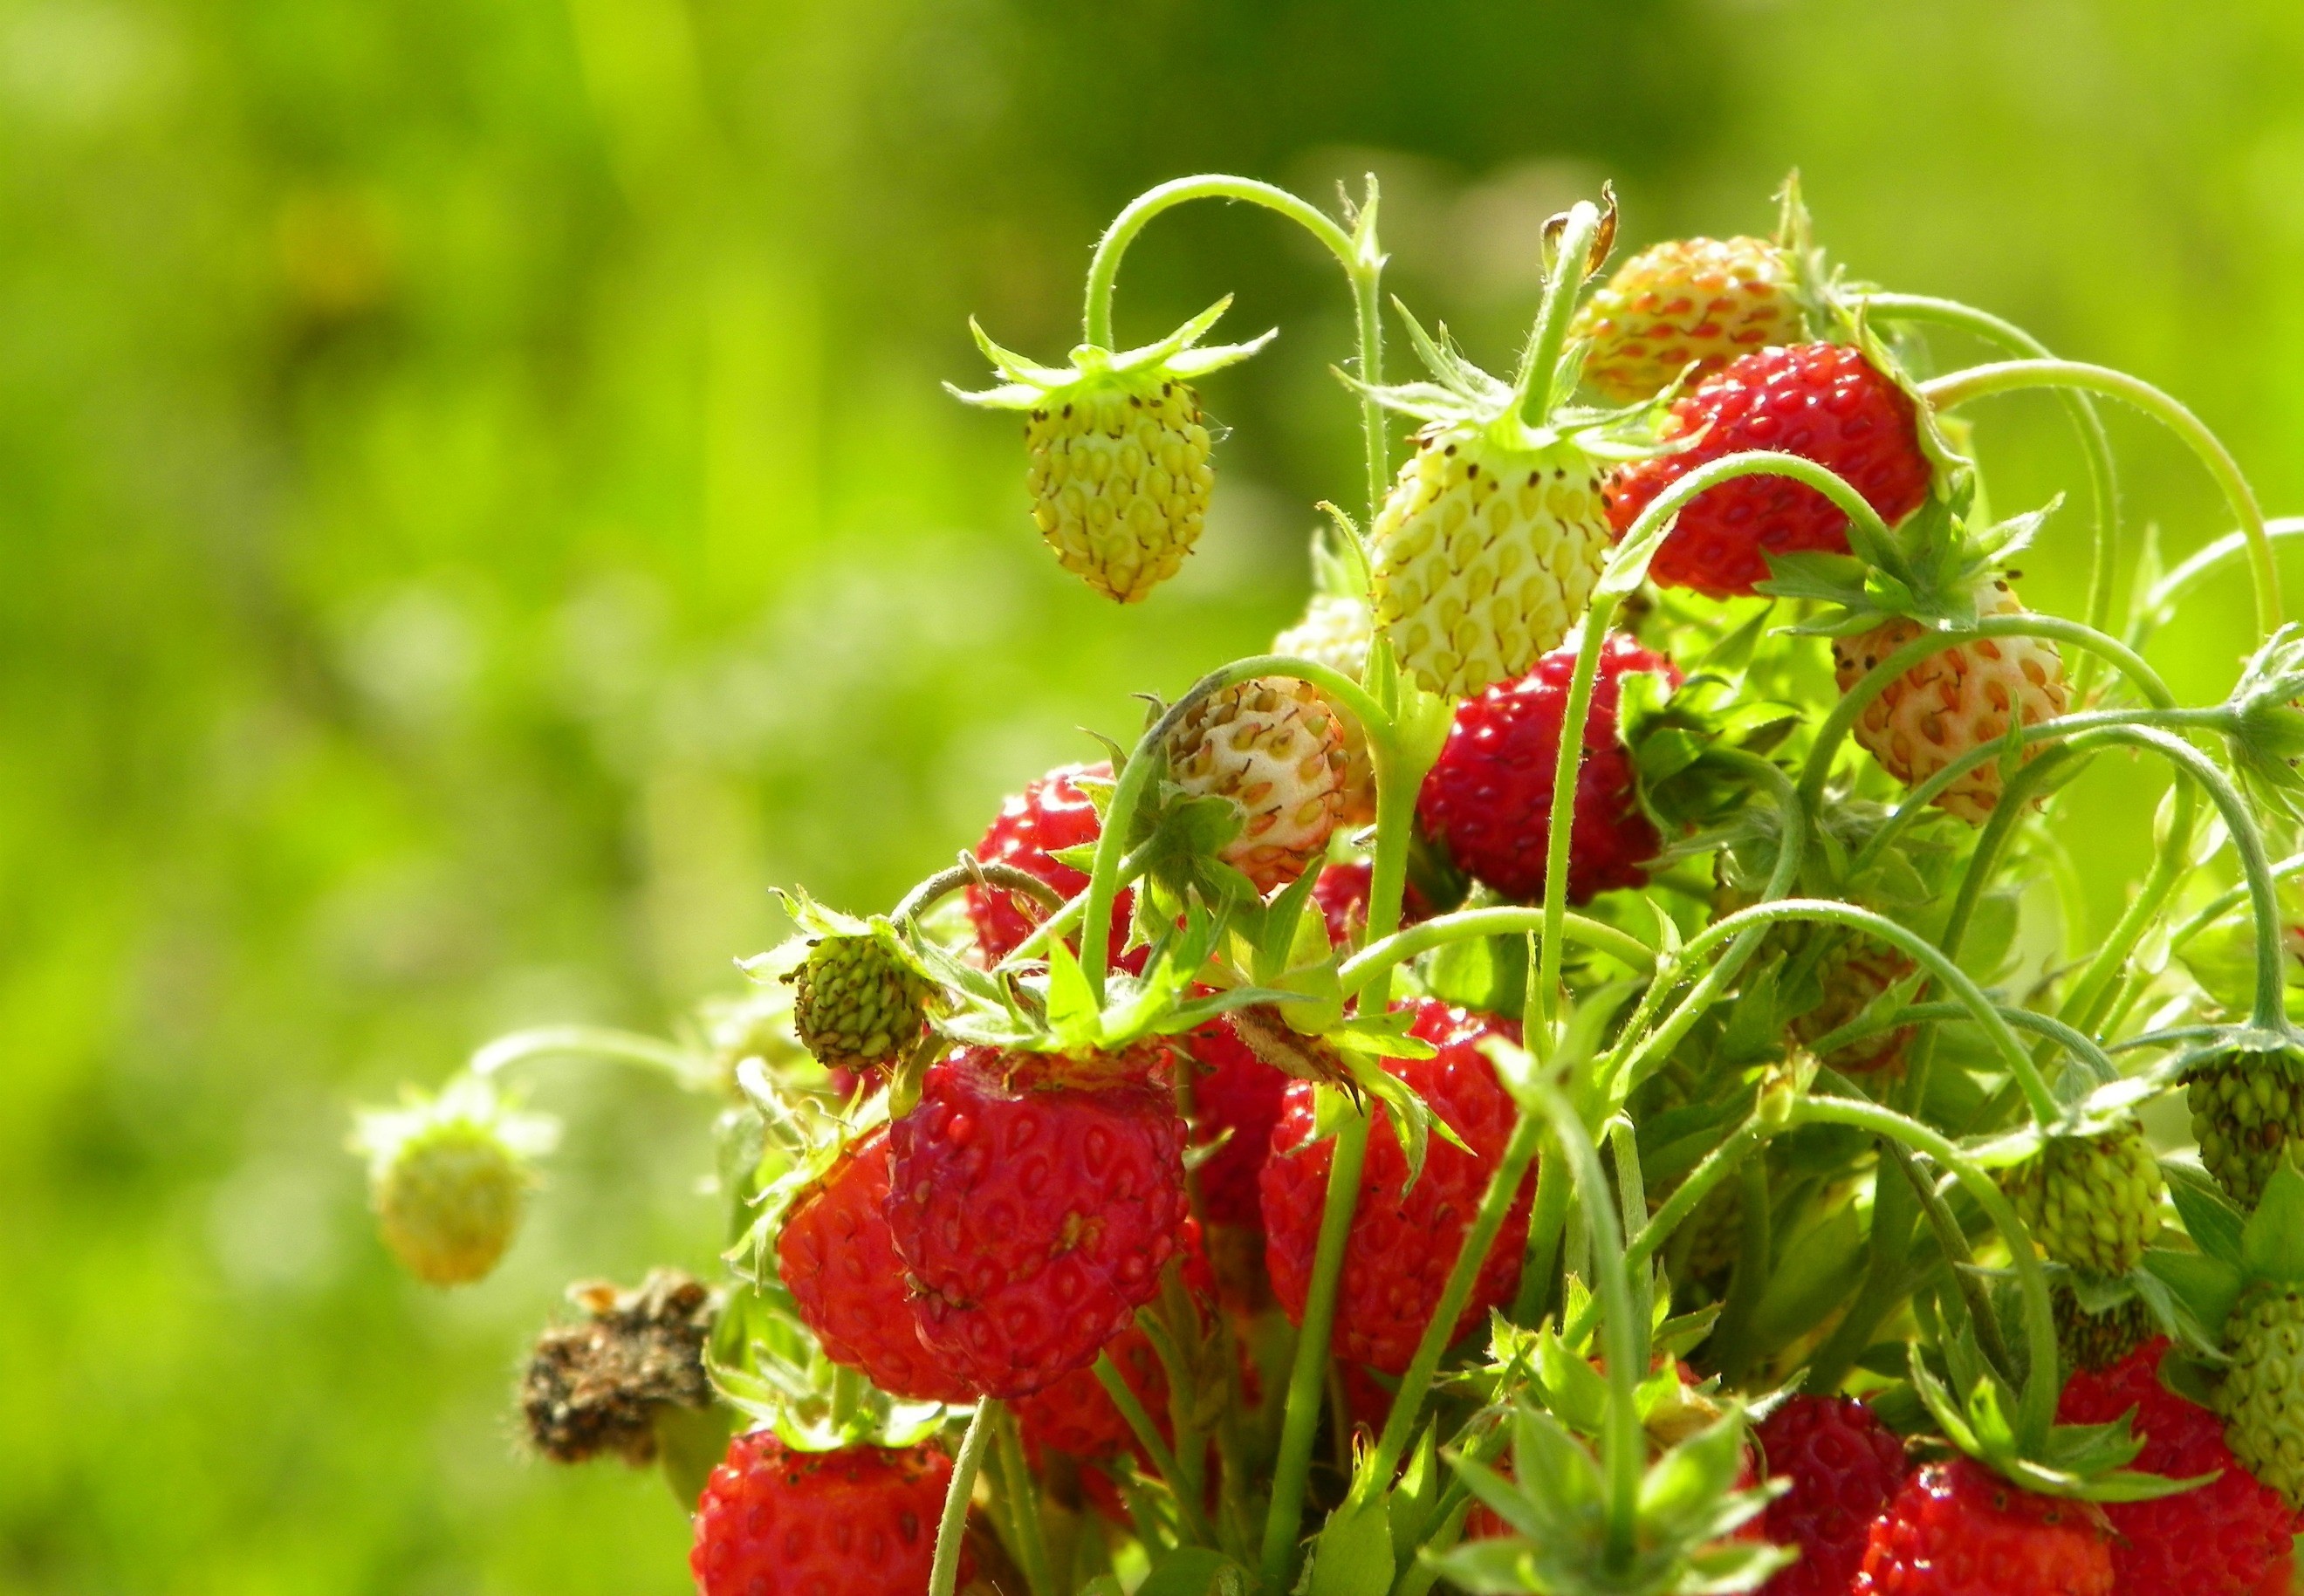 2640x1829 Wallpapers for Desktop: strawberry wallpaper - strawberry category